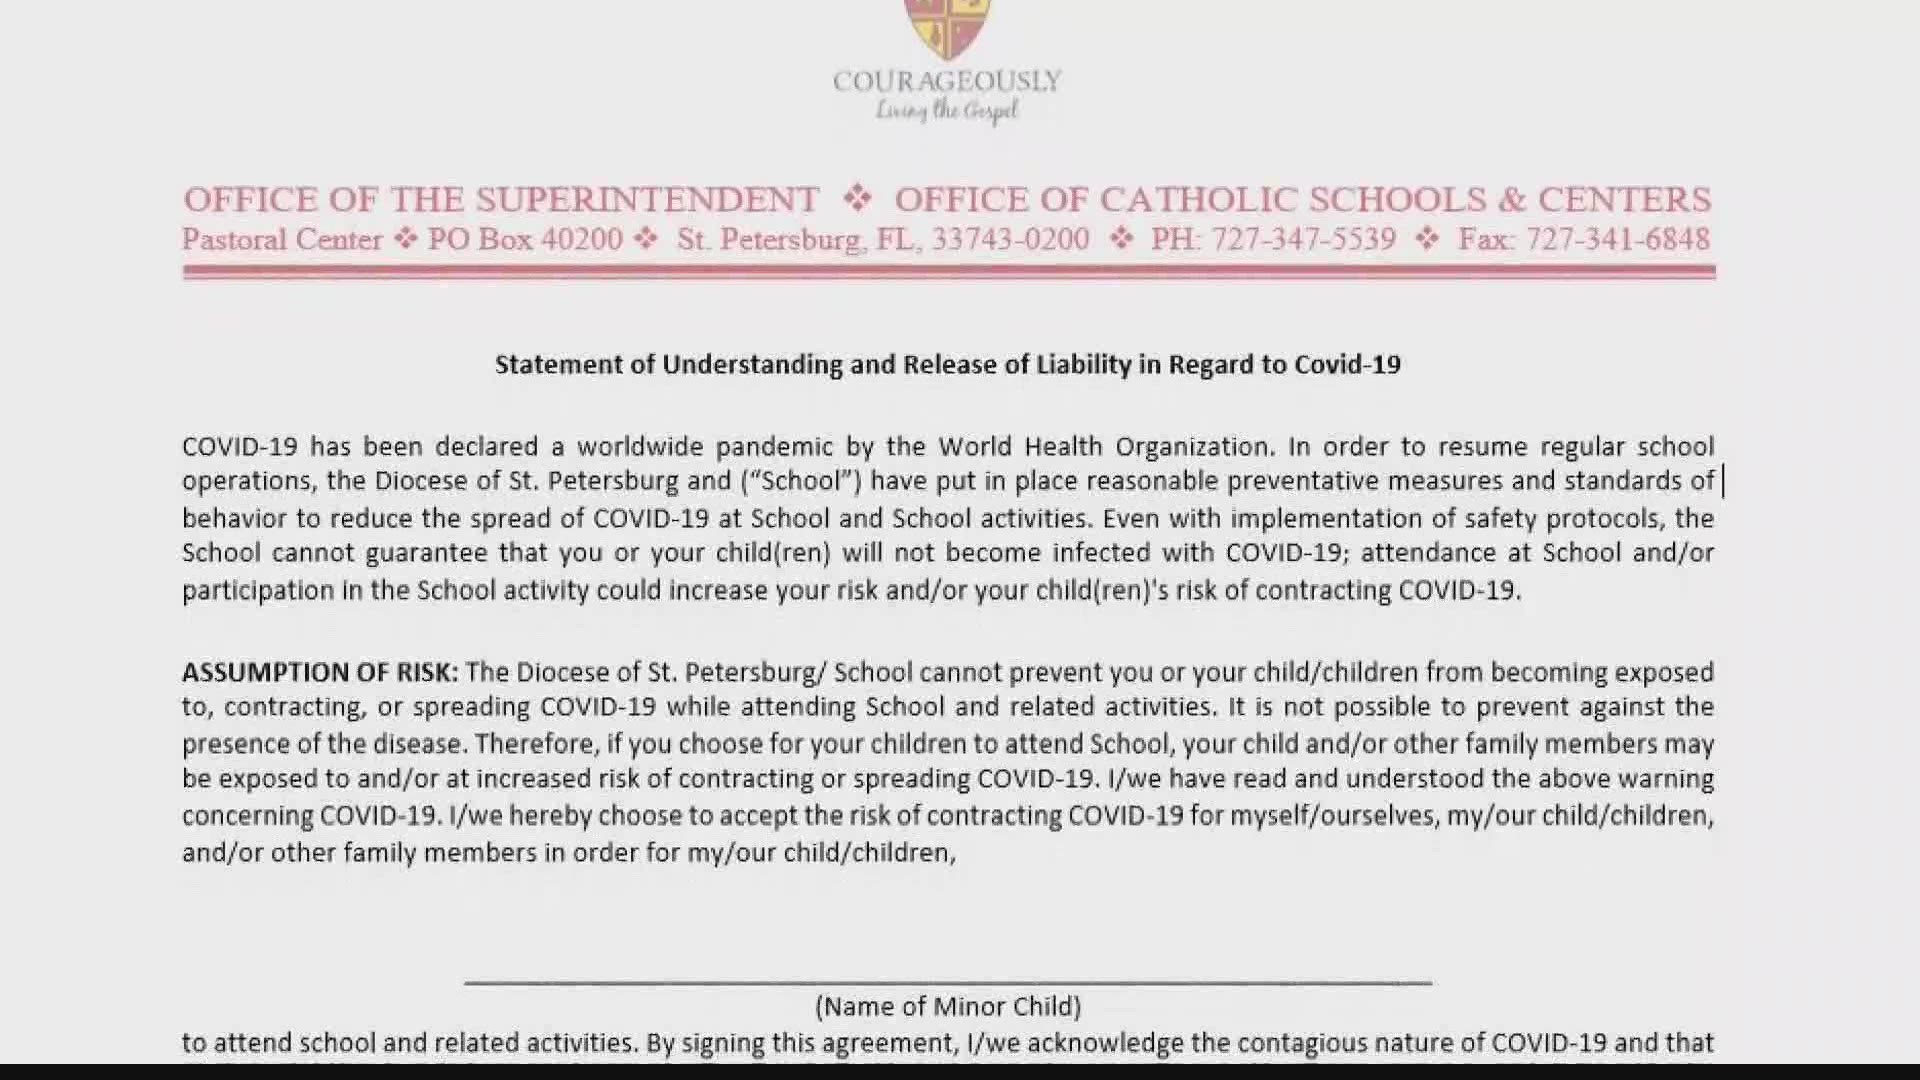 Parents said the Catholic Diocese of St. Petersburg sent home COVID-19 waivers to be signed before school begins.